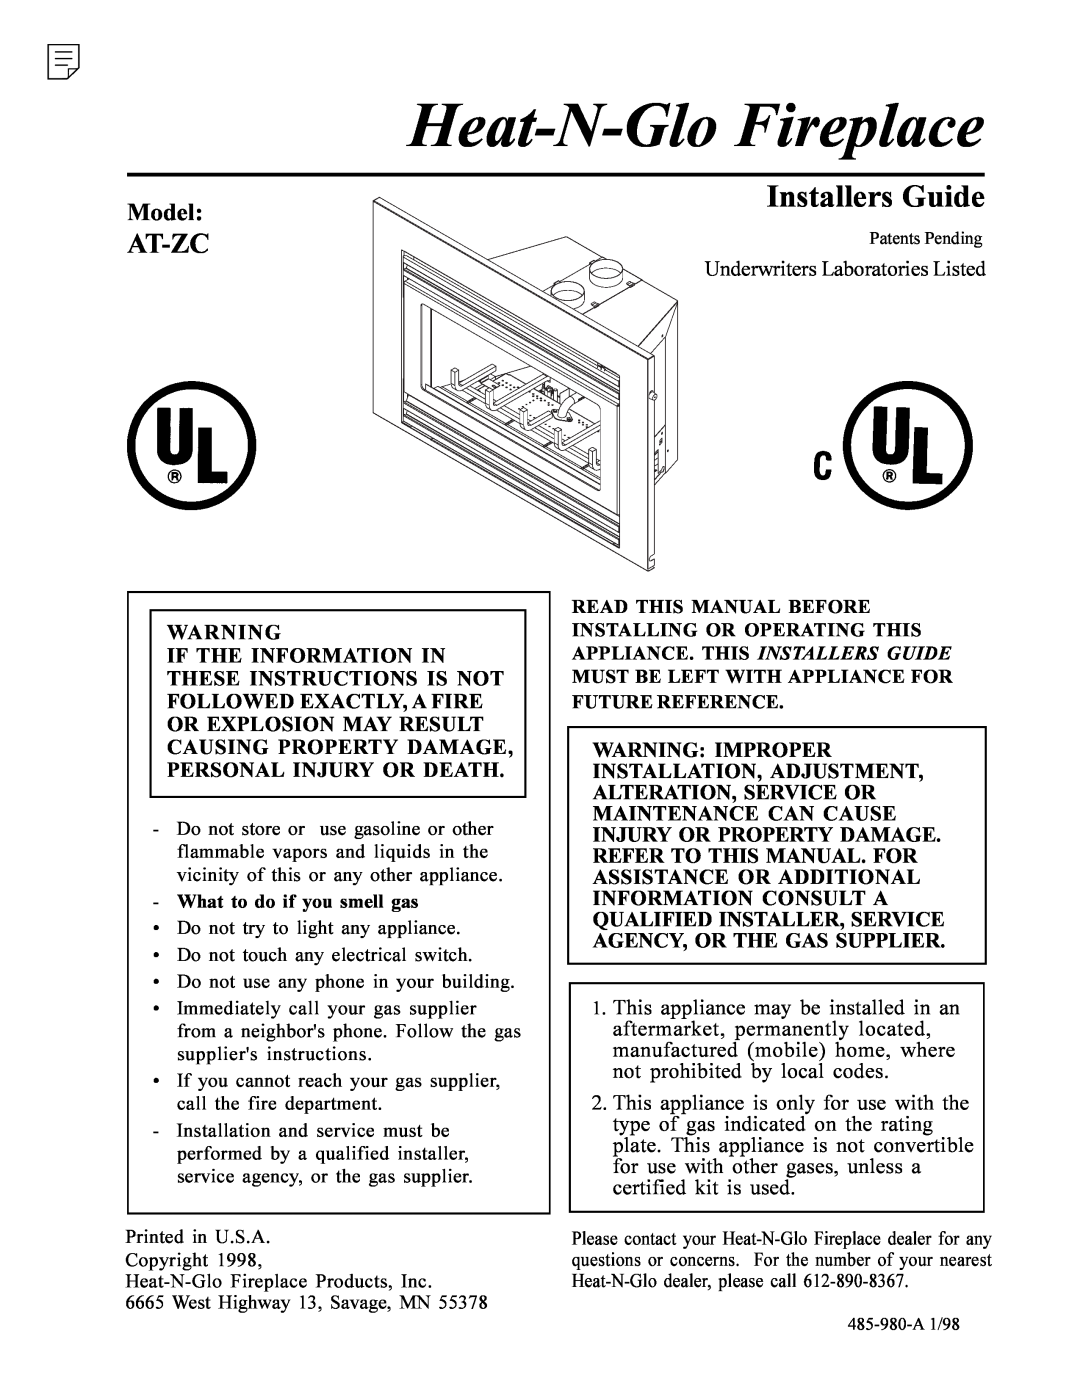 Heat & Glo LifeStyle AT-ZC manual Model, Heat-N-GloFireplace, Installers Guide, At-Zc 